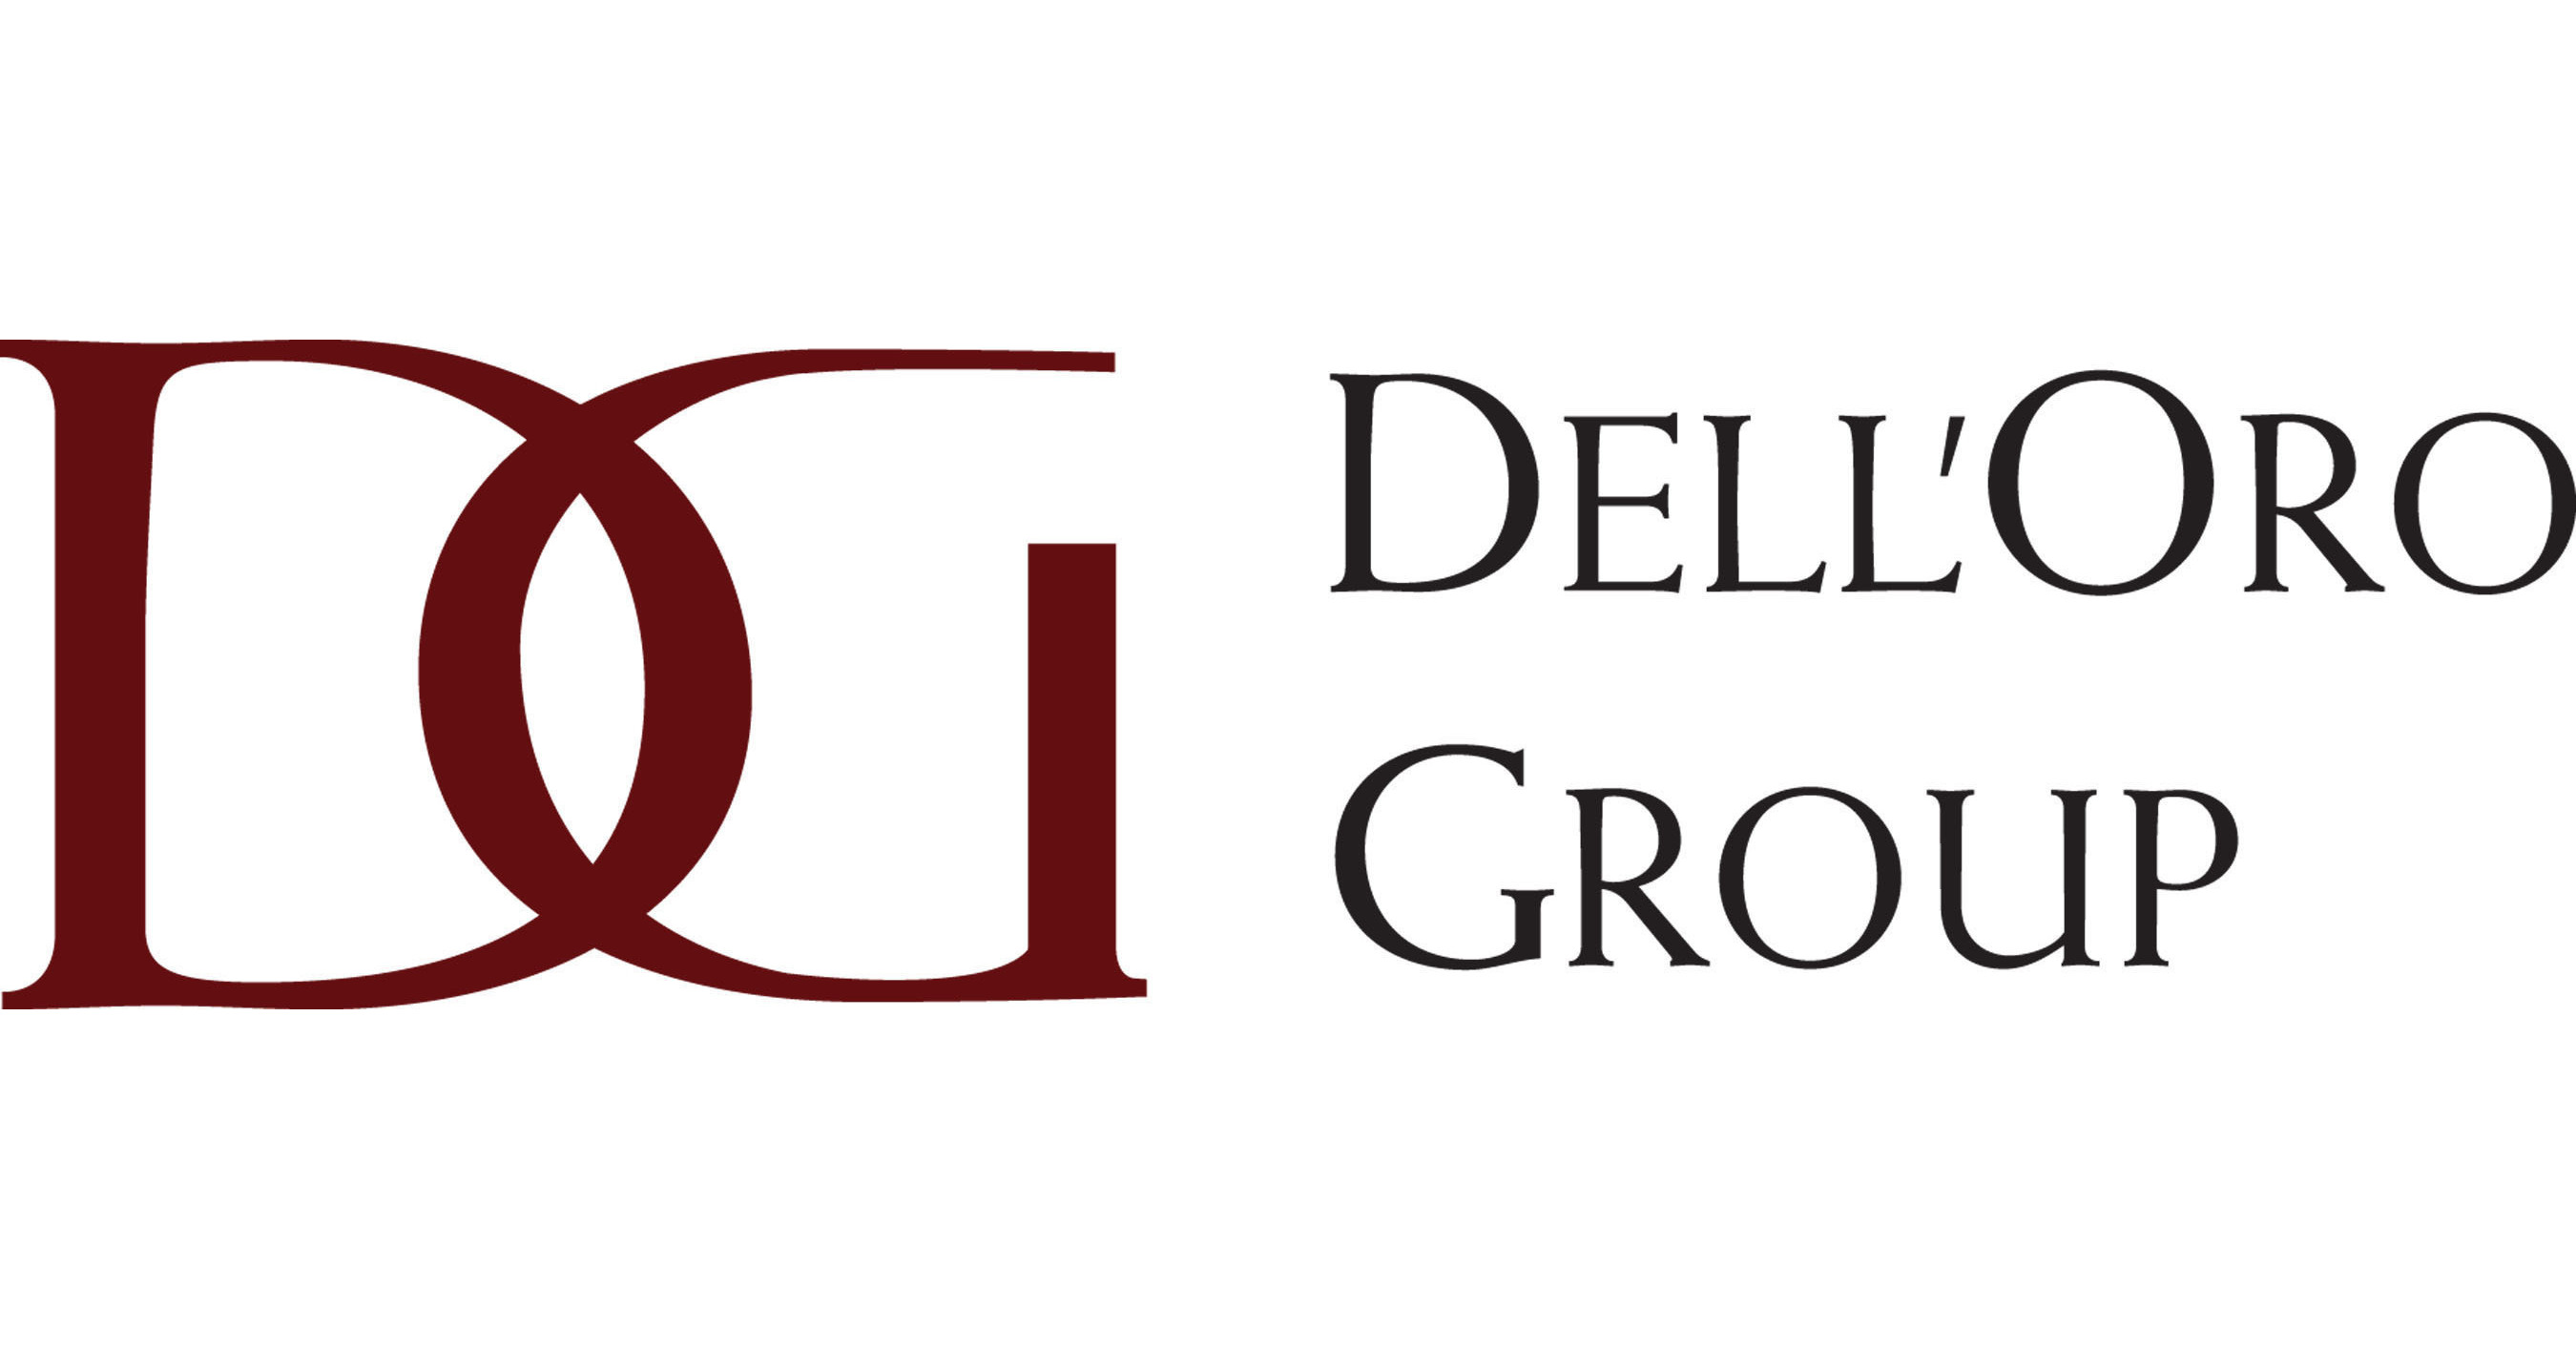 RAN Market Reach New Record Levels According to Dell'Oro Group